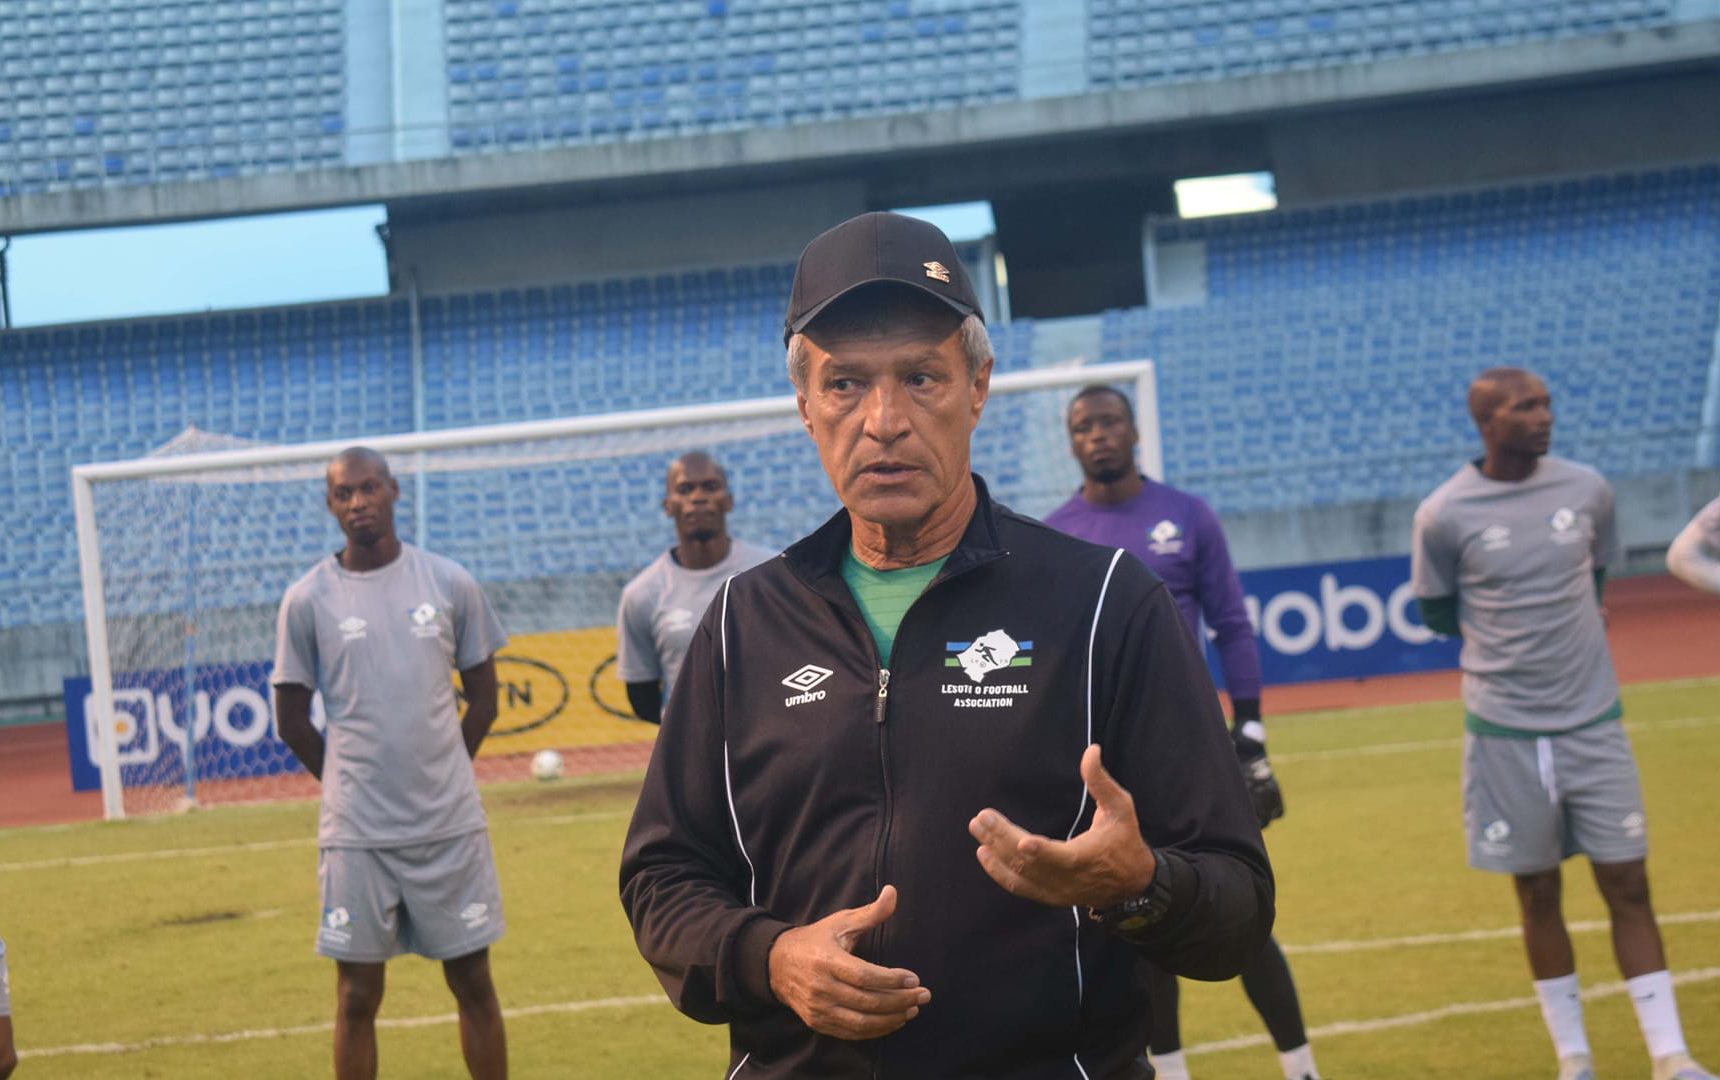 Lesotho confident of victory against Zambia despite Europe-based player advantage